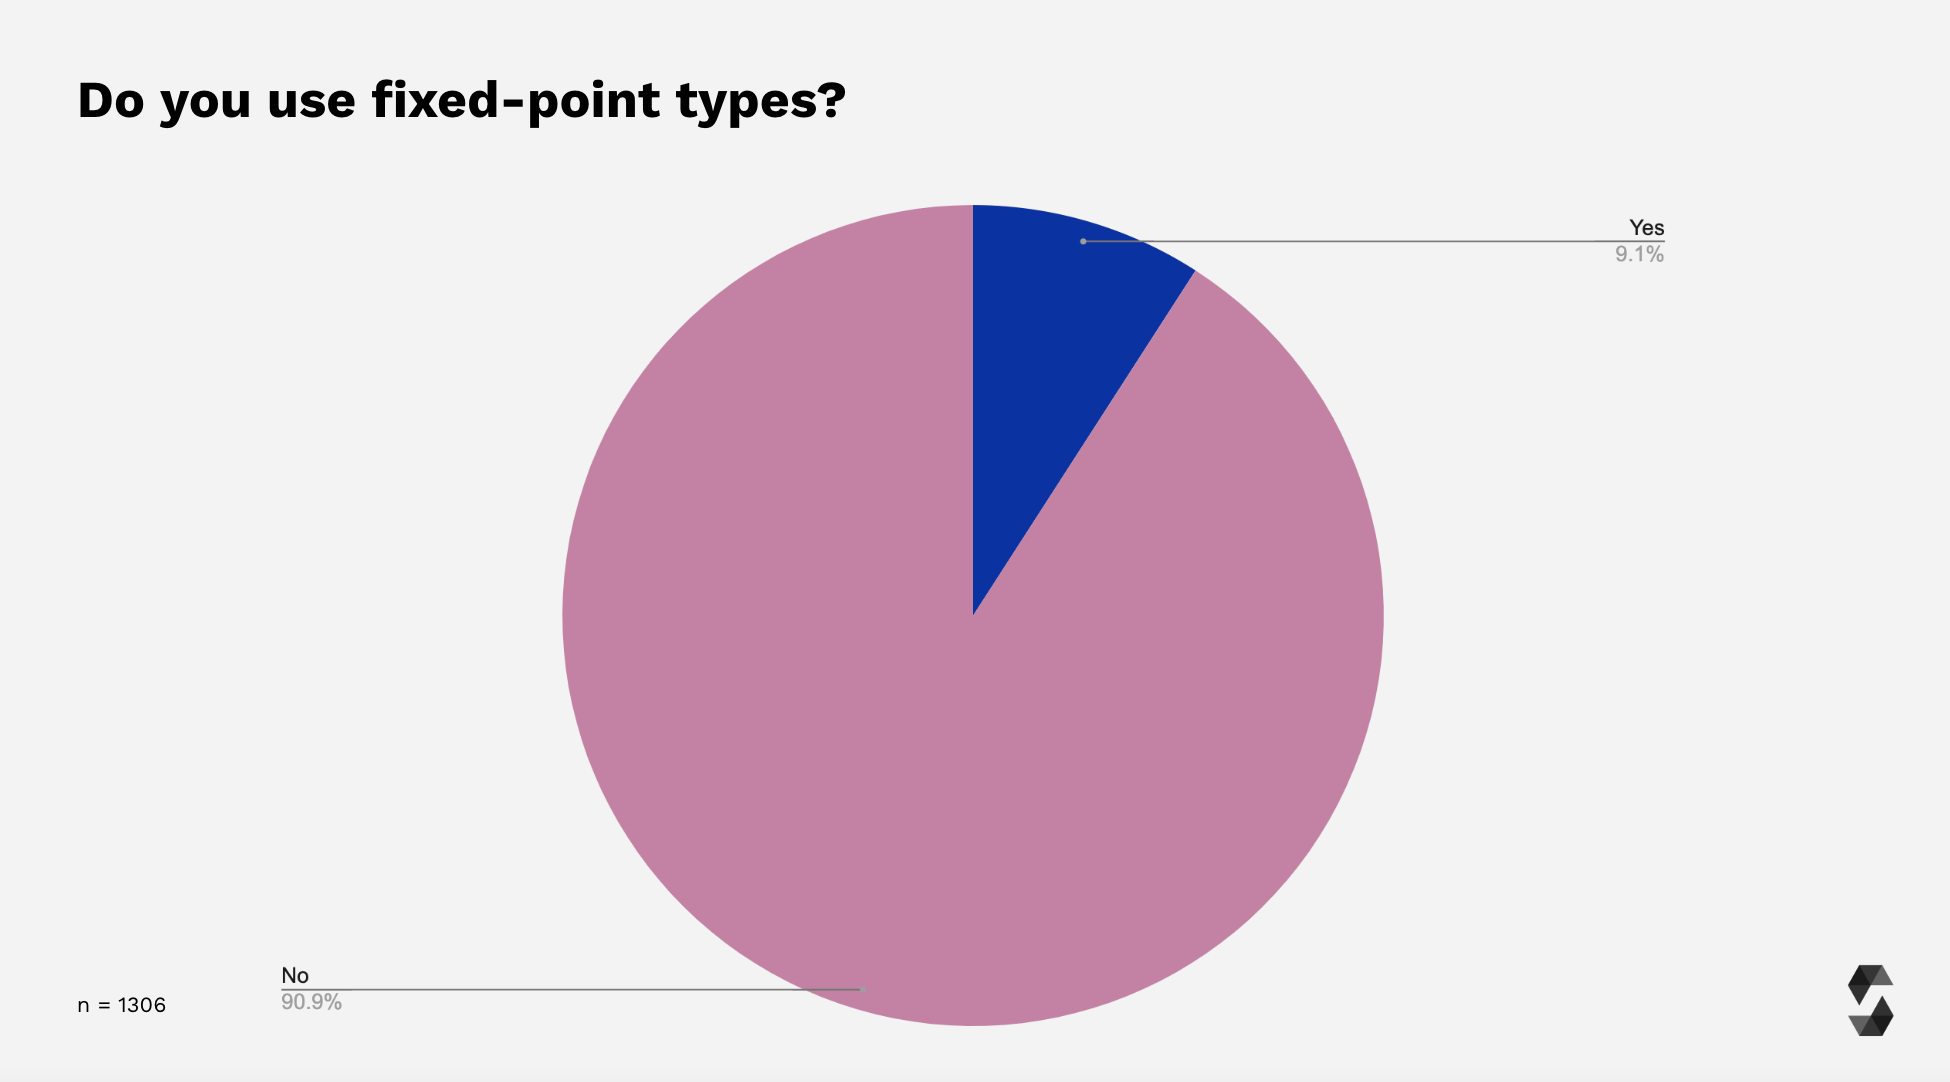 Fixed-Point Types Usage